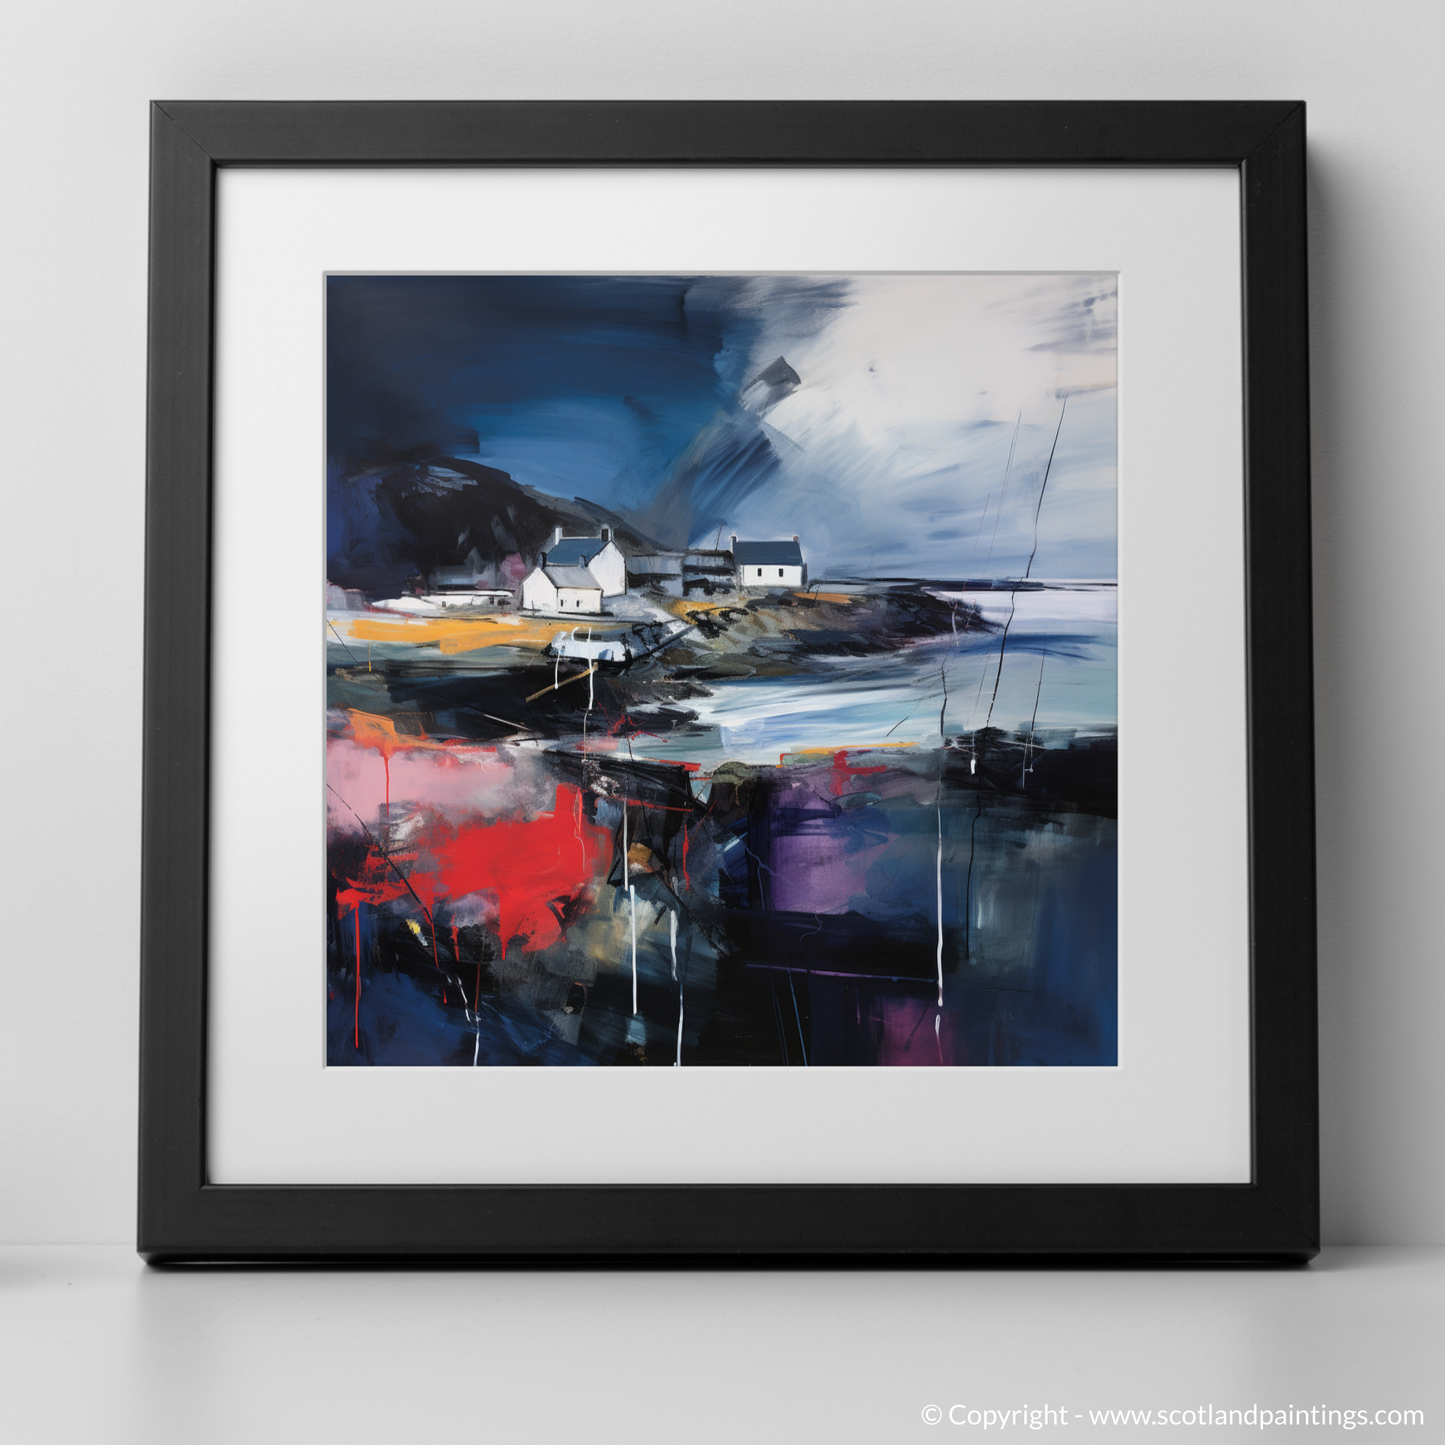 Stormy Symphony: The Abstract Essence of Cullen Harbour